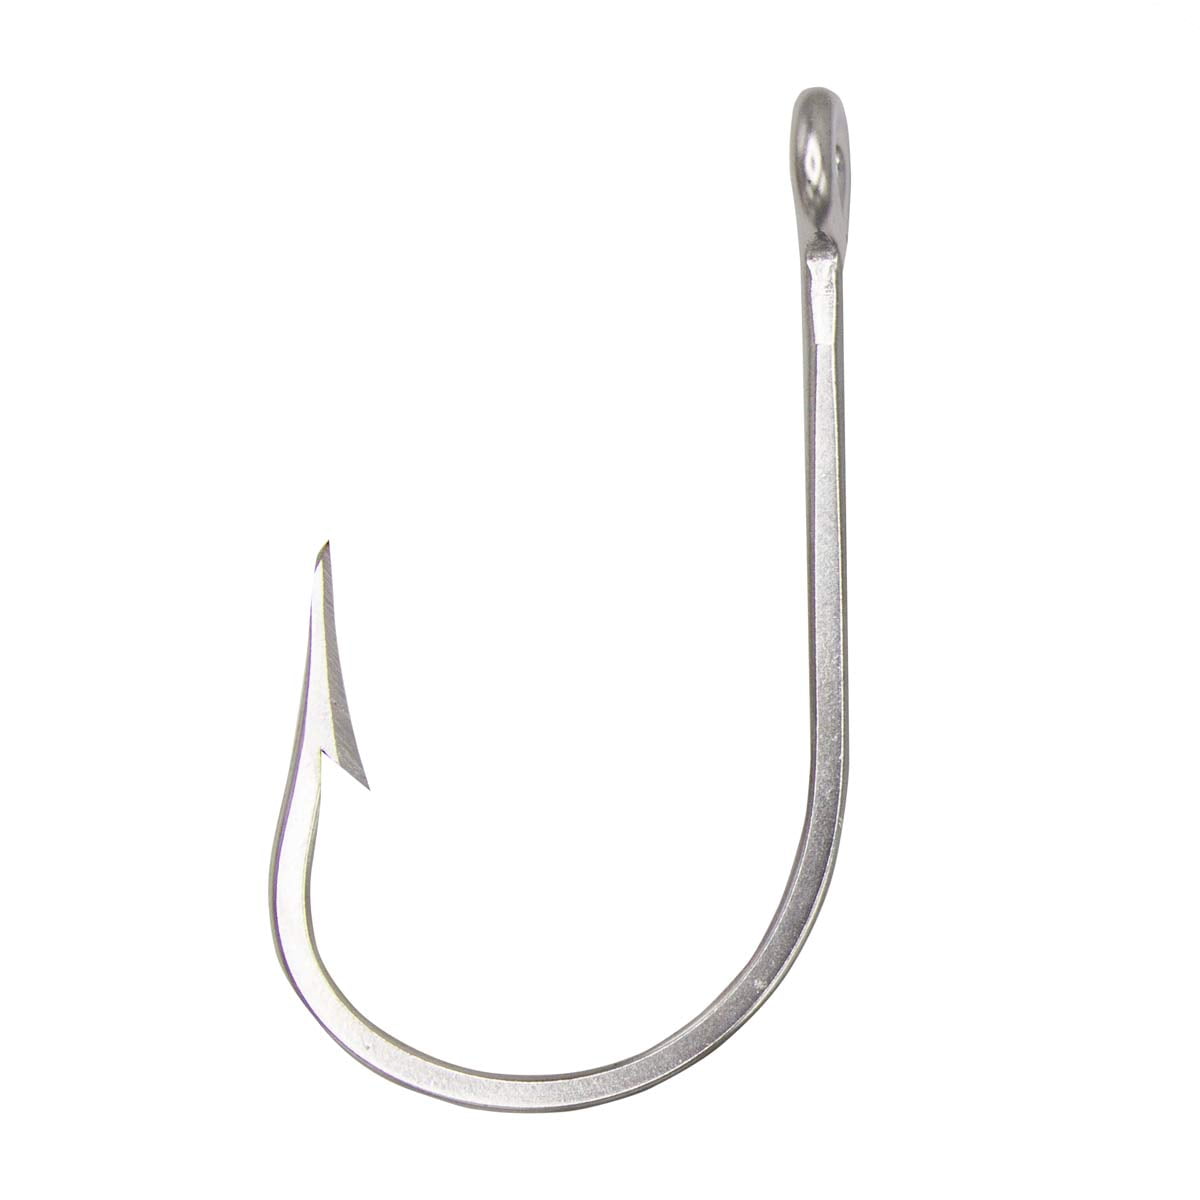 Rite Angler Big Game Stainless Steel Hook Offshore Angler Trolling